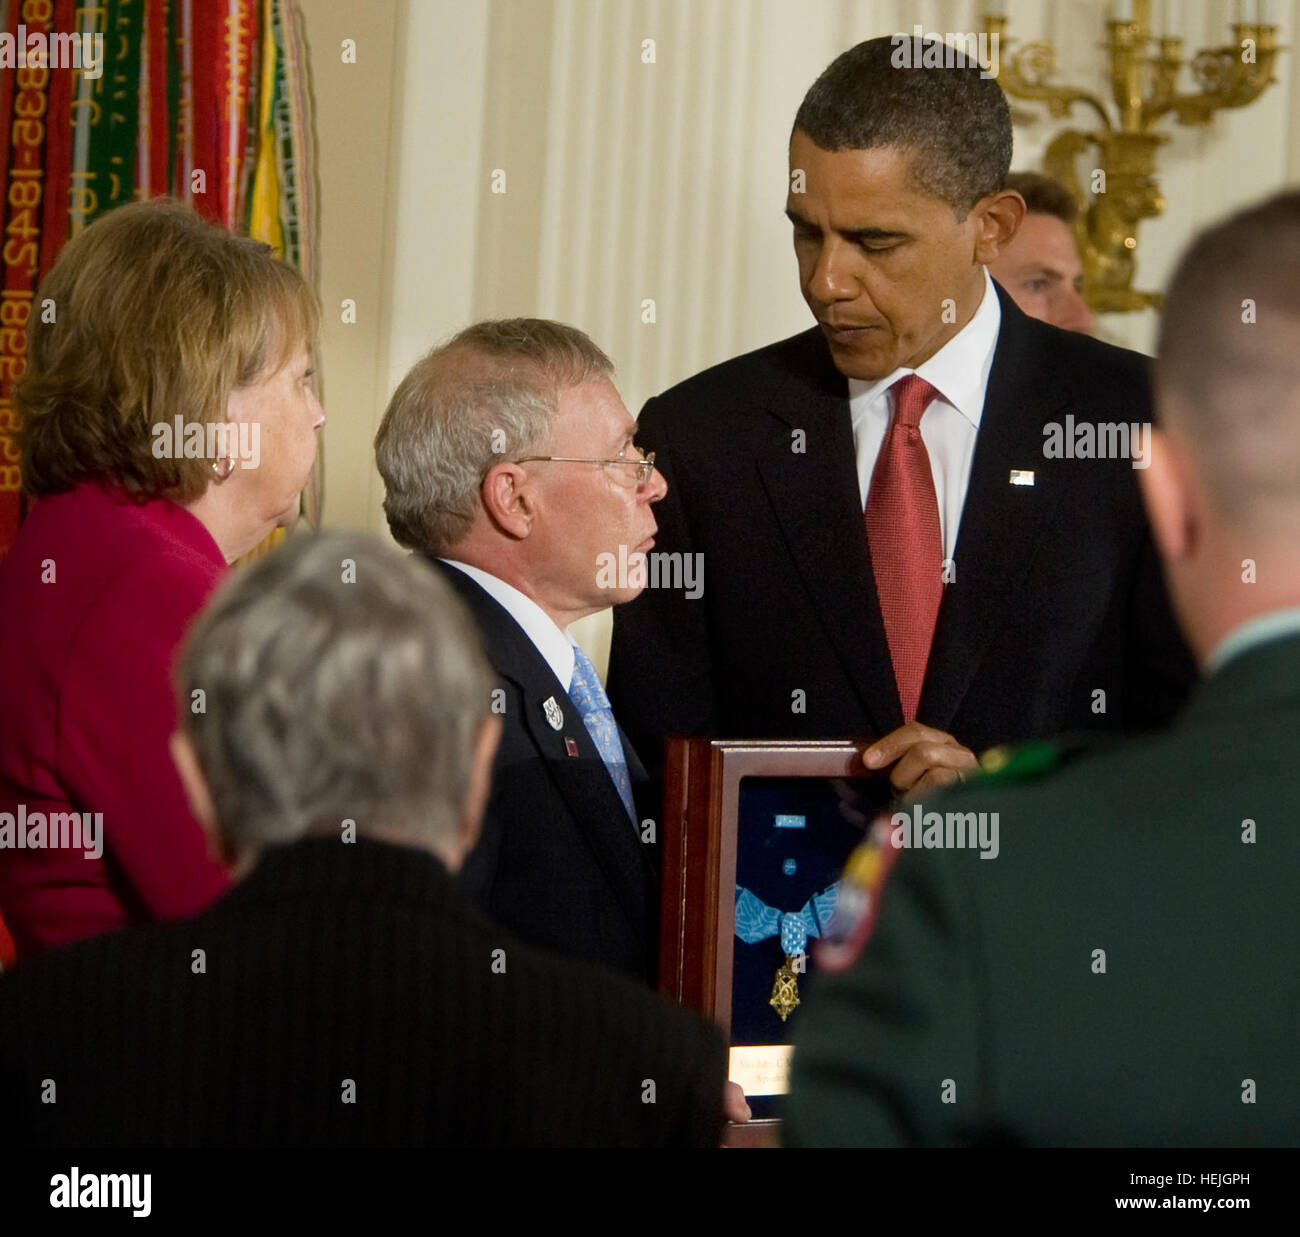 President Barack Obama posthumously awards Army Sgt. 1st. Class Jared C. Monti from Raynham, Mass., the Medal of Honor to his parents Paul and Janet Monti Sept. 17, 2009, in the East Room of the White House in Washington D.C..  ÒJared Monti saw danger before him and he went out to meet it,Ó President Obama said in the ceremony.  Army photo by D. Myles Cullen (released) US Army 50897 President awards Medal of Honor Stock Photo